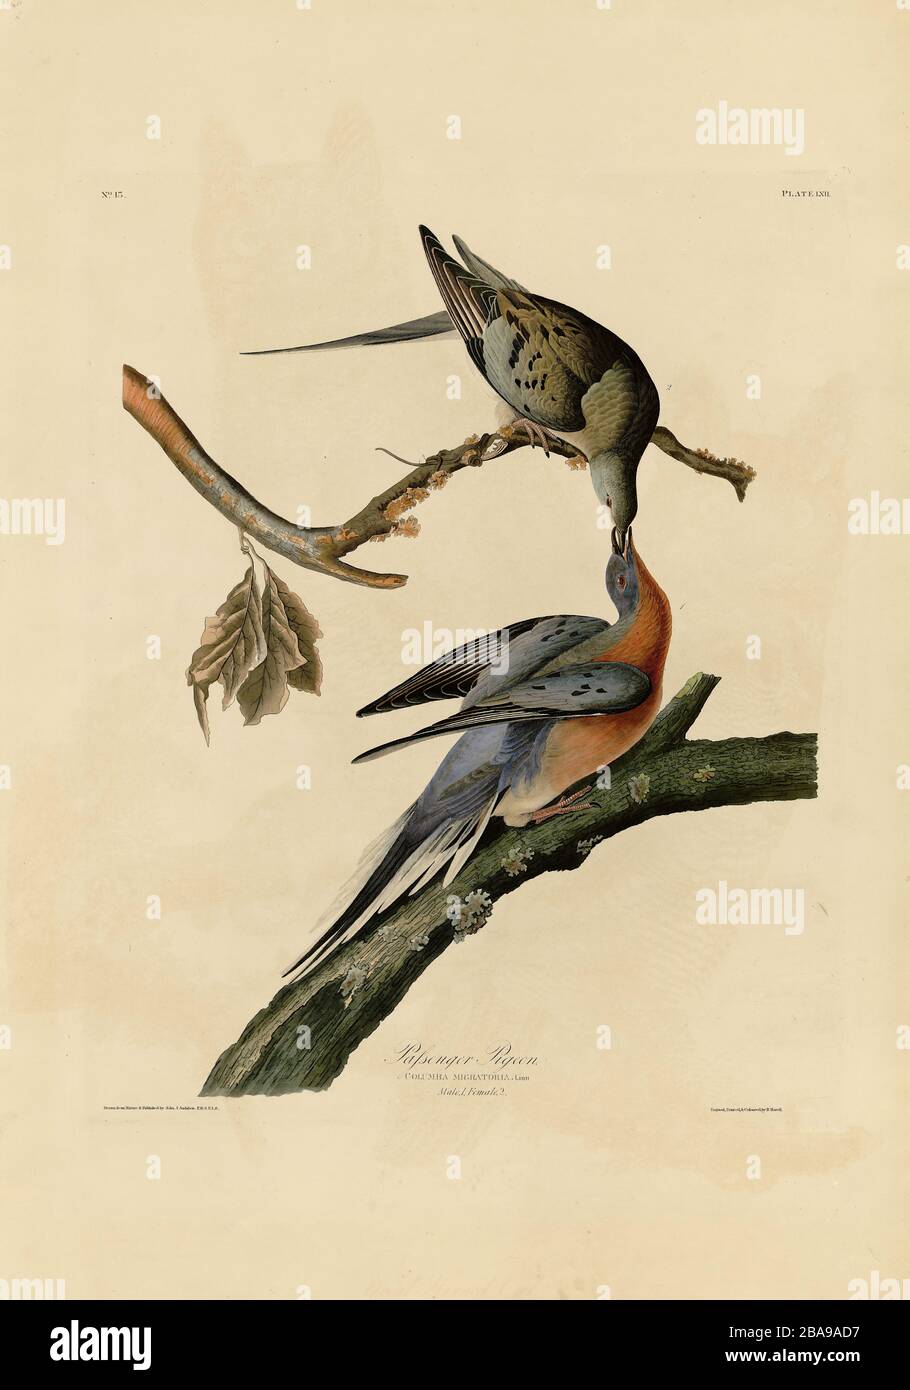 Plate 62 Passenger Pigeon from The Birds of America folio (1827–1839) by John James Audubon - Very high resolution and quality edited image Stock Photo